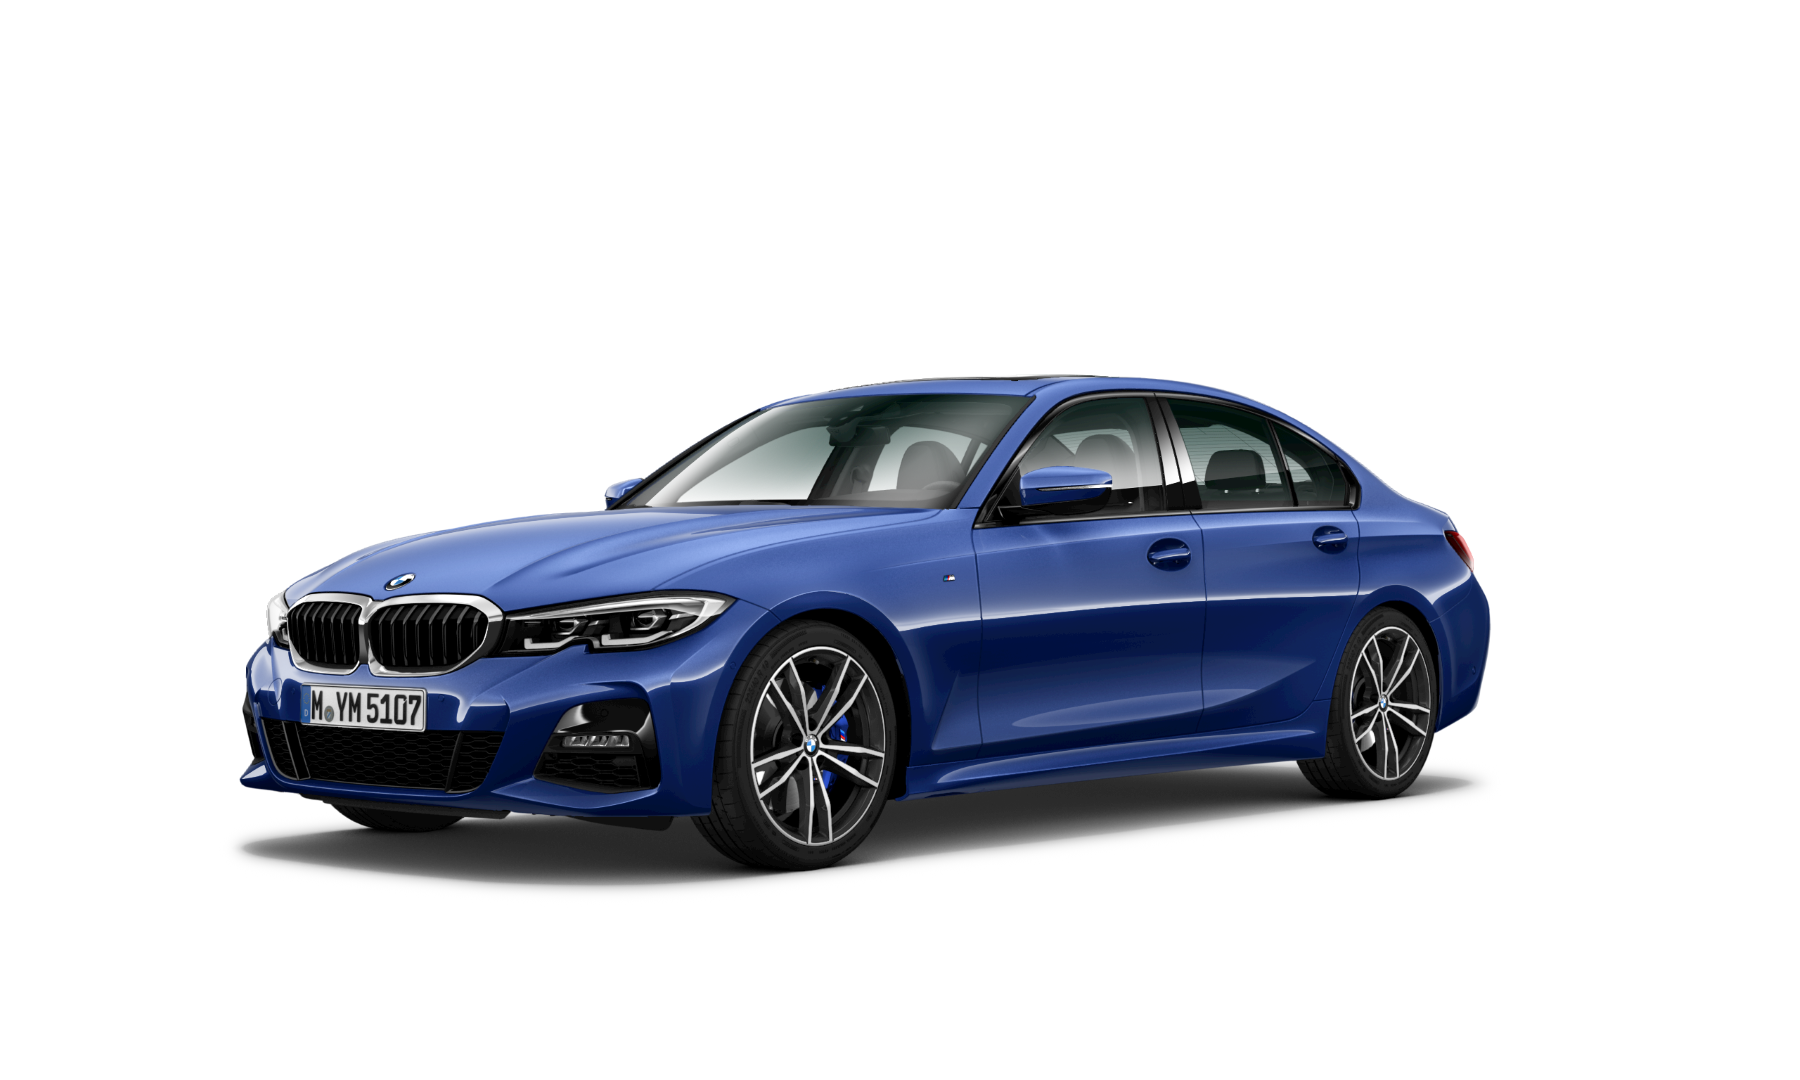 TopGear 2022 BMW 320i M Sport Edition, 330i M Sport Edition launched